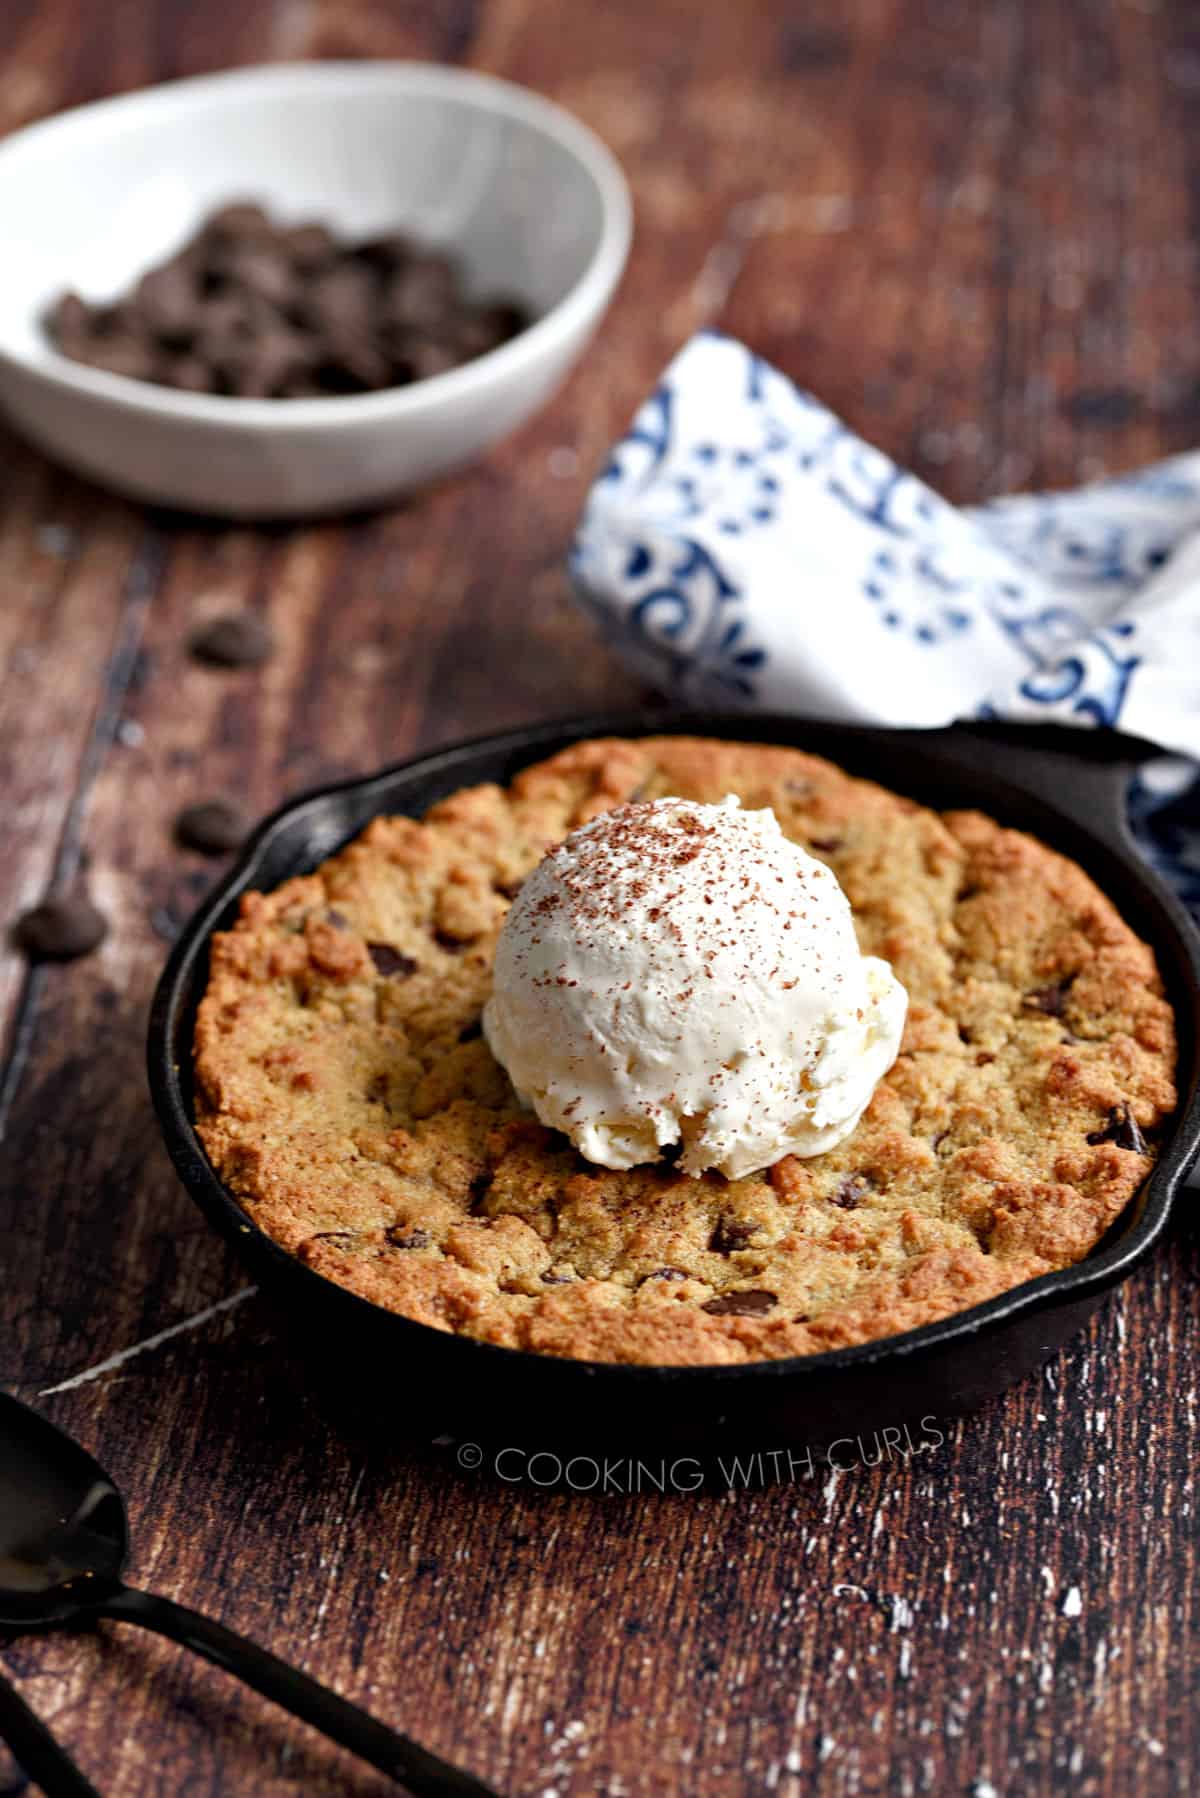 Mini cast iron skillet with a chocolate chip cookie topped with a scoop of vanilla ice cream, with a white bowl of chocolate chips in the background.